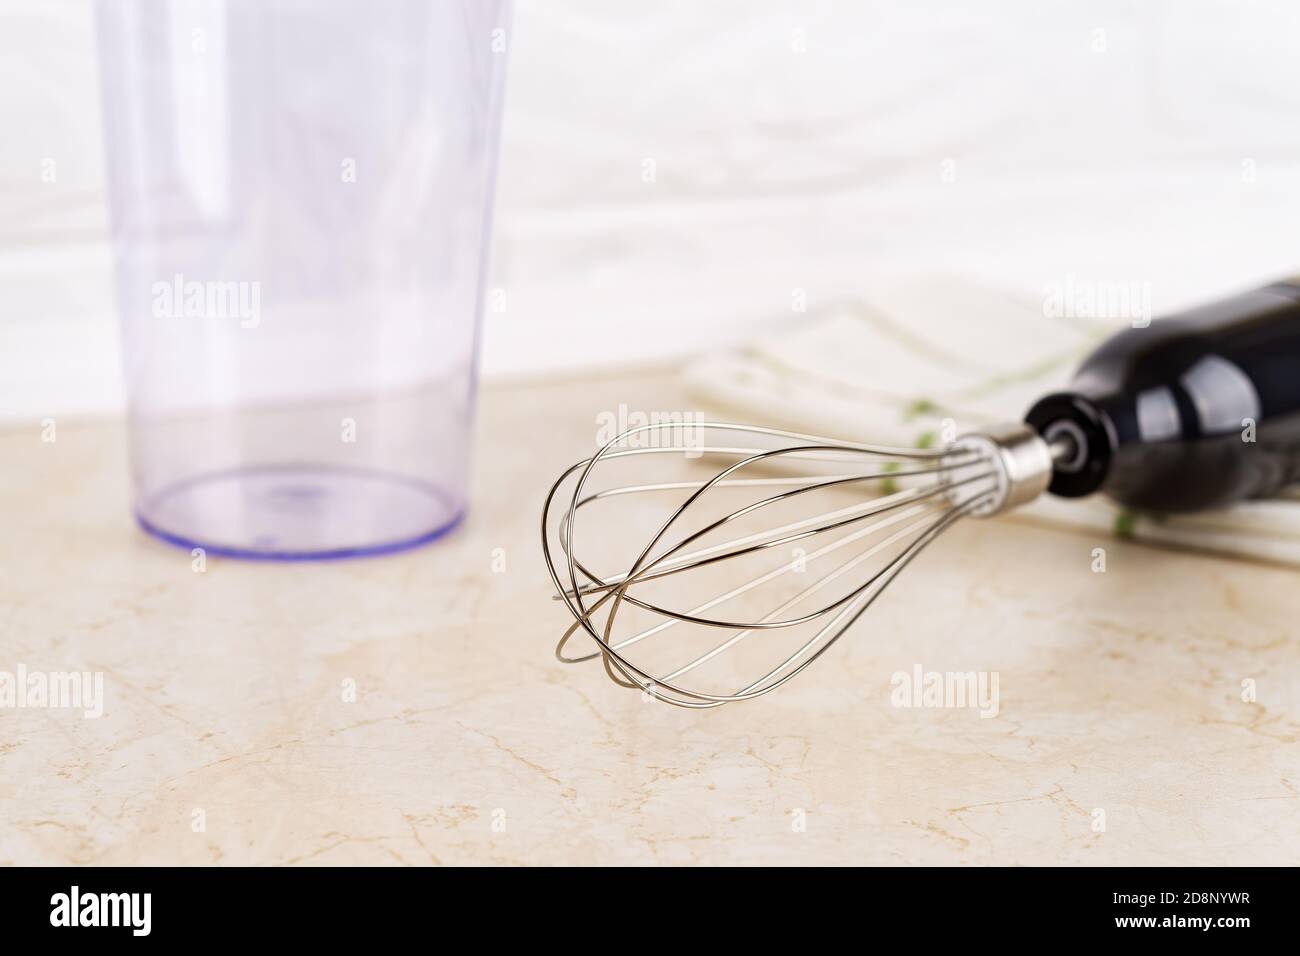 Close-up of immersion hand blender whisk for whipping and cup on a table. Modern electric kitchen appliances for making sauces, smoothies, puree. Stock Photo